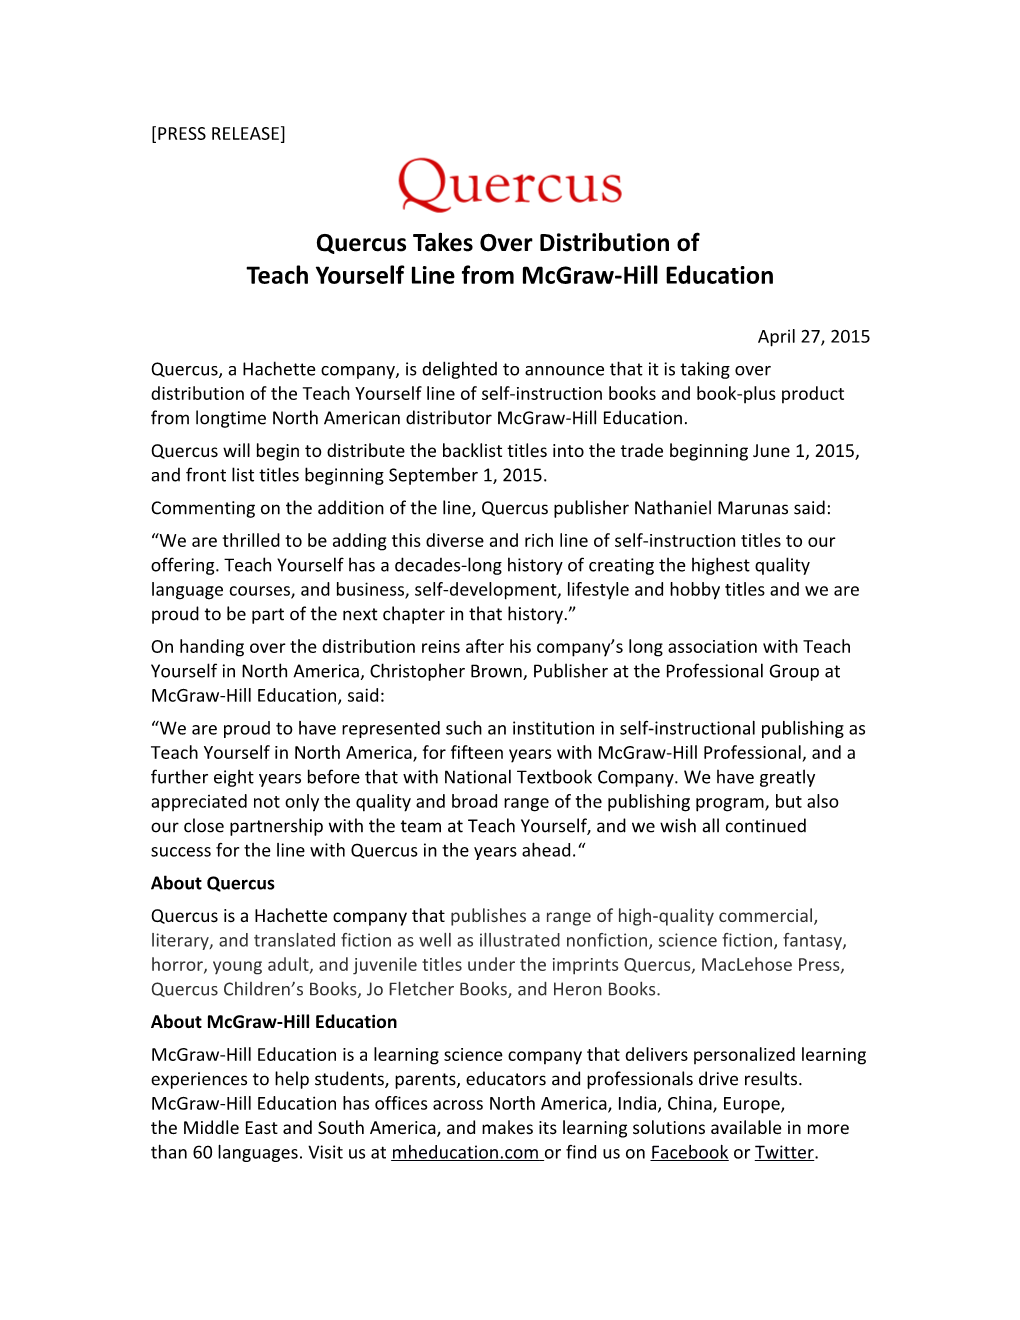 Quercus Takes Over Distribution of Teach Yourself Line from Mcgraw-Hill Education